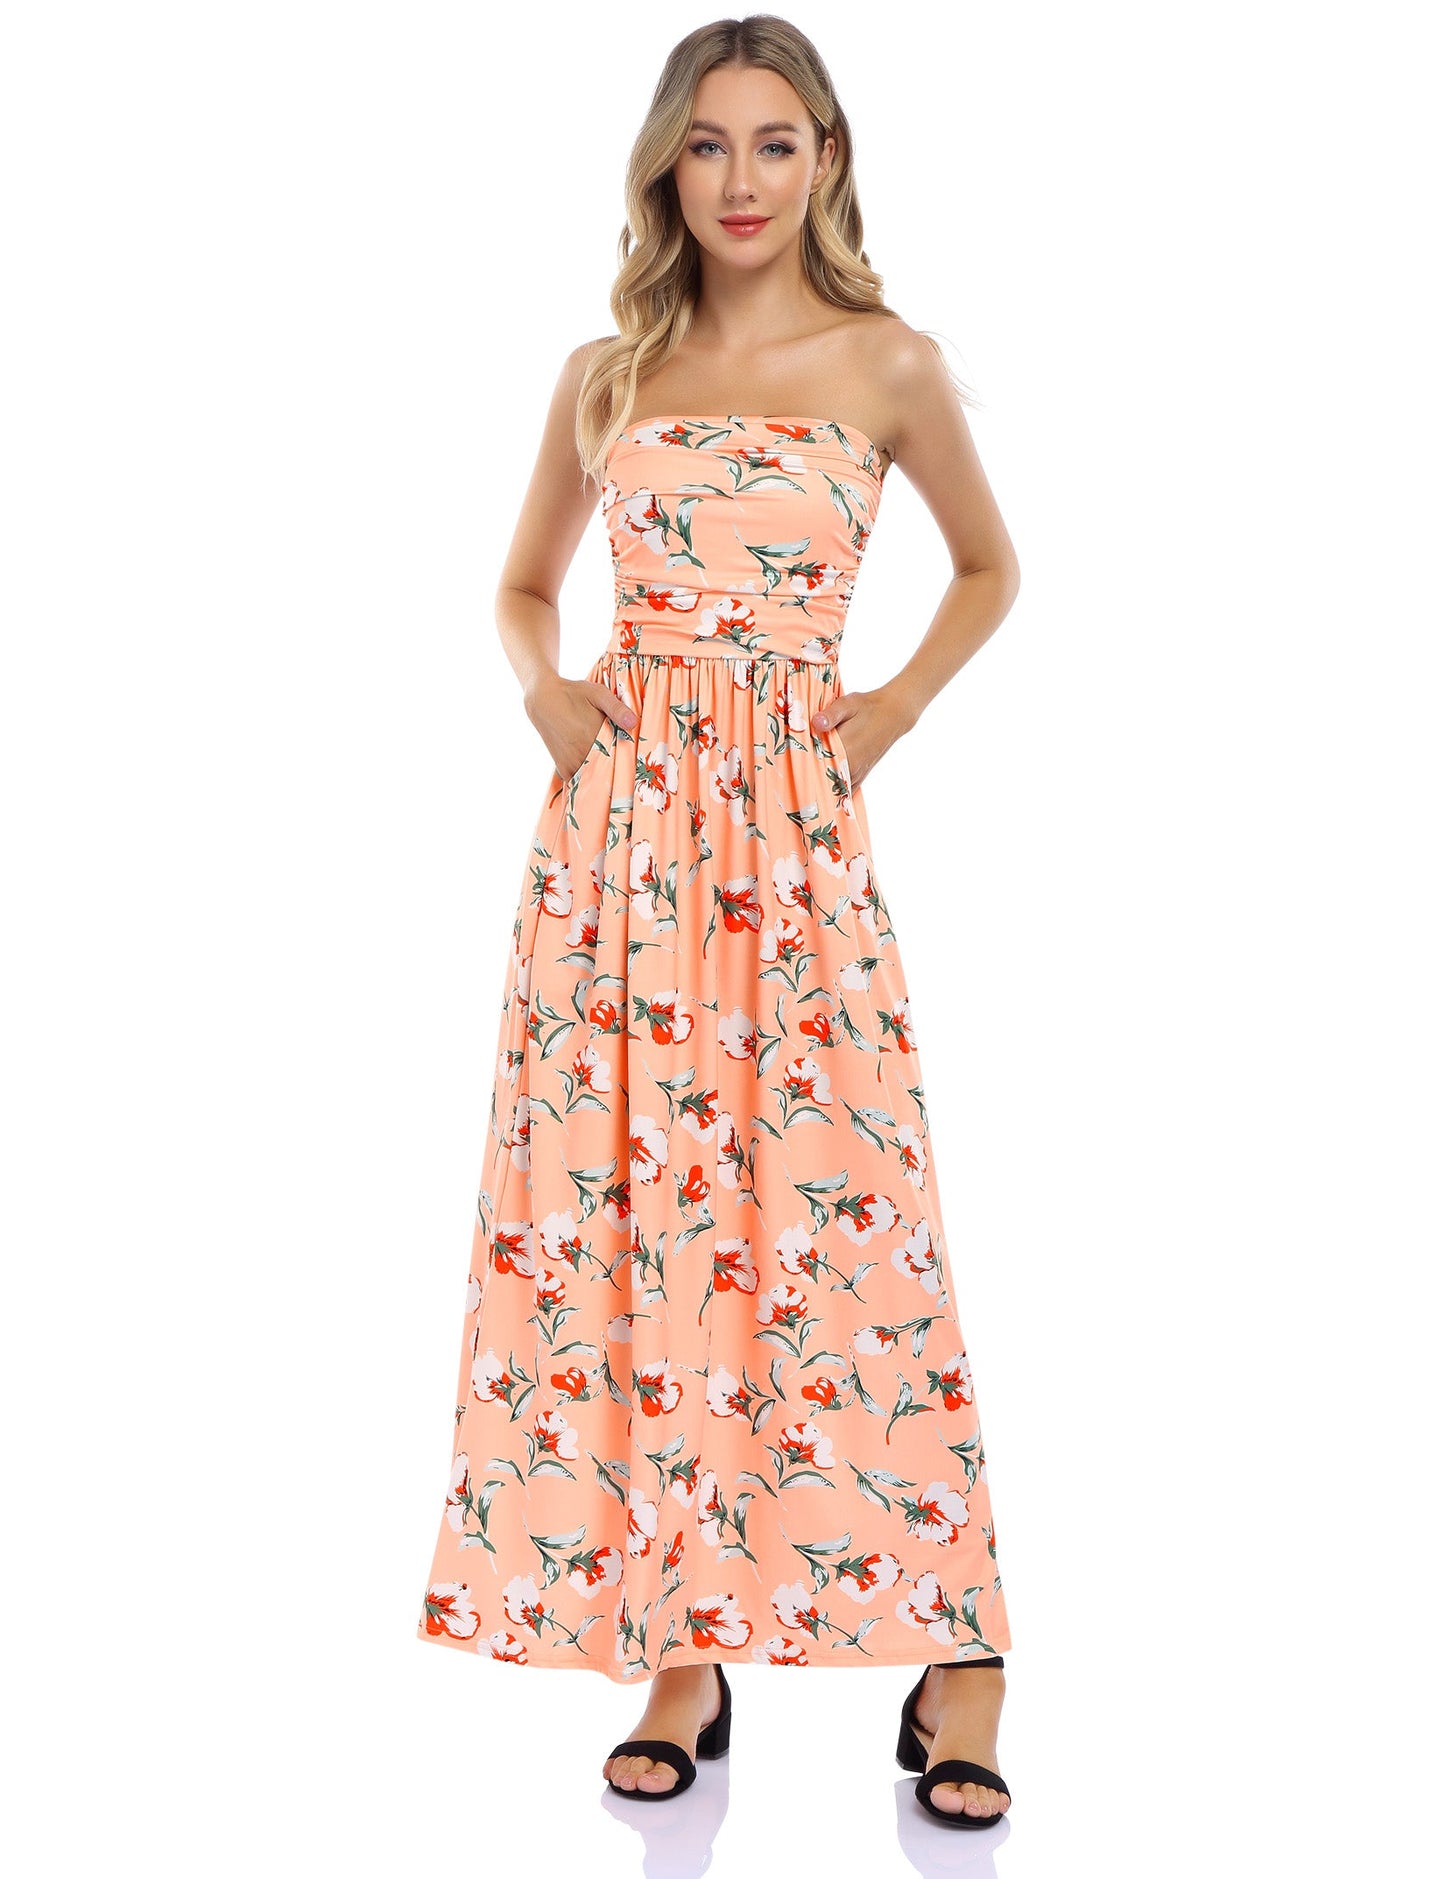 YESFASHION Women's Strapless Graceful Floral Party Maxi Long Dress Floral Pink